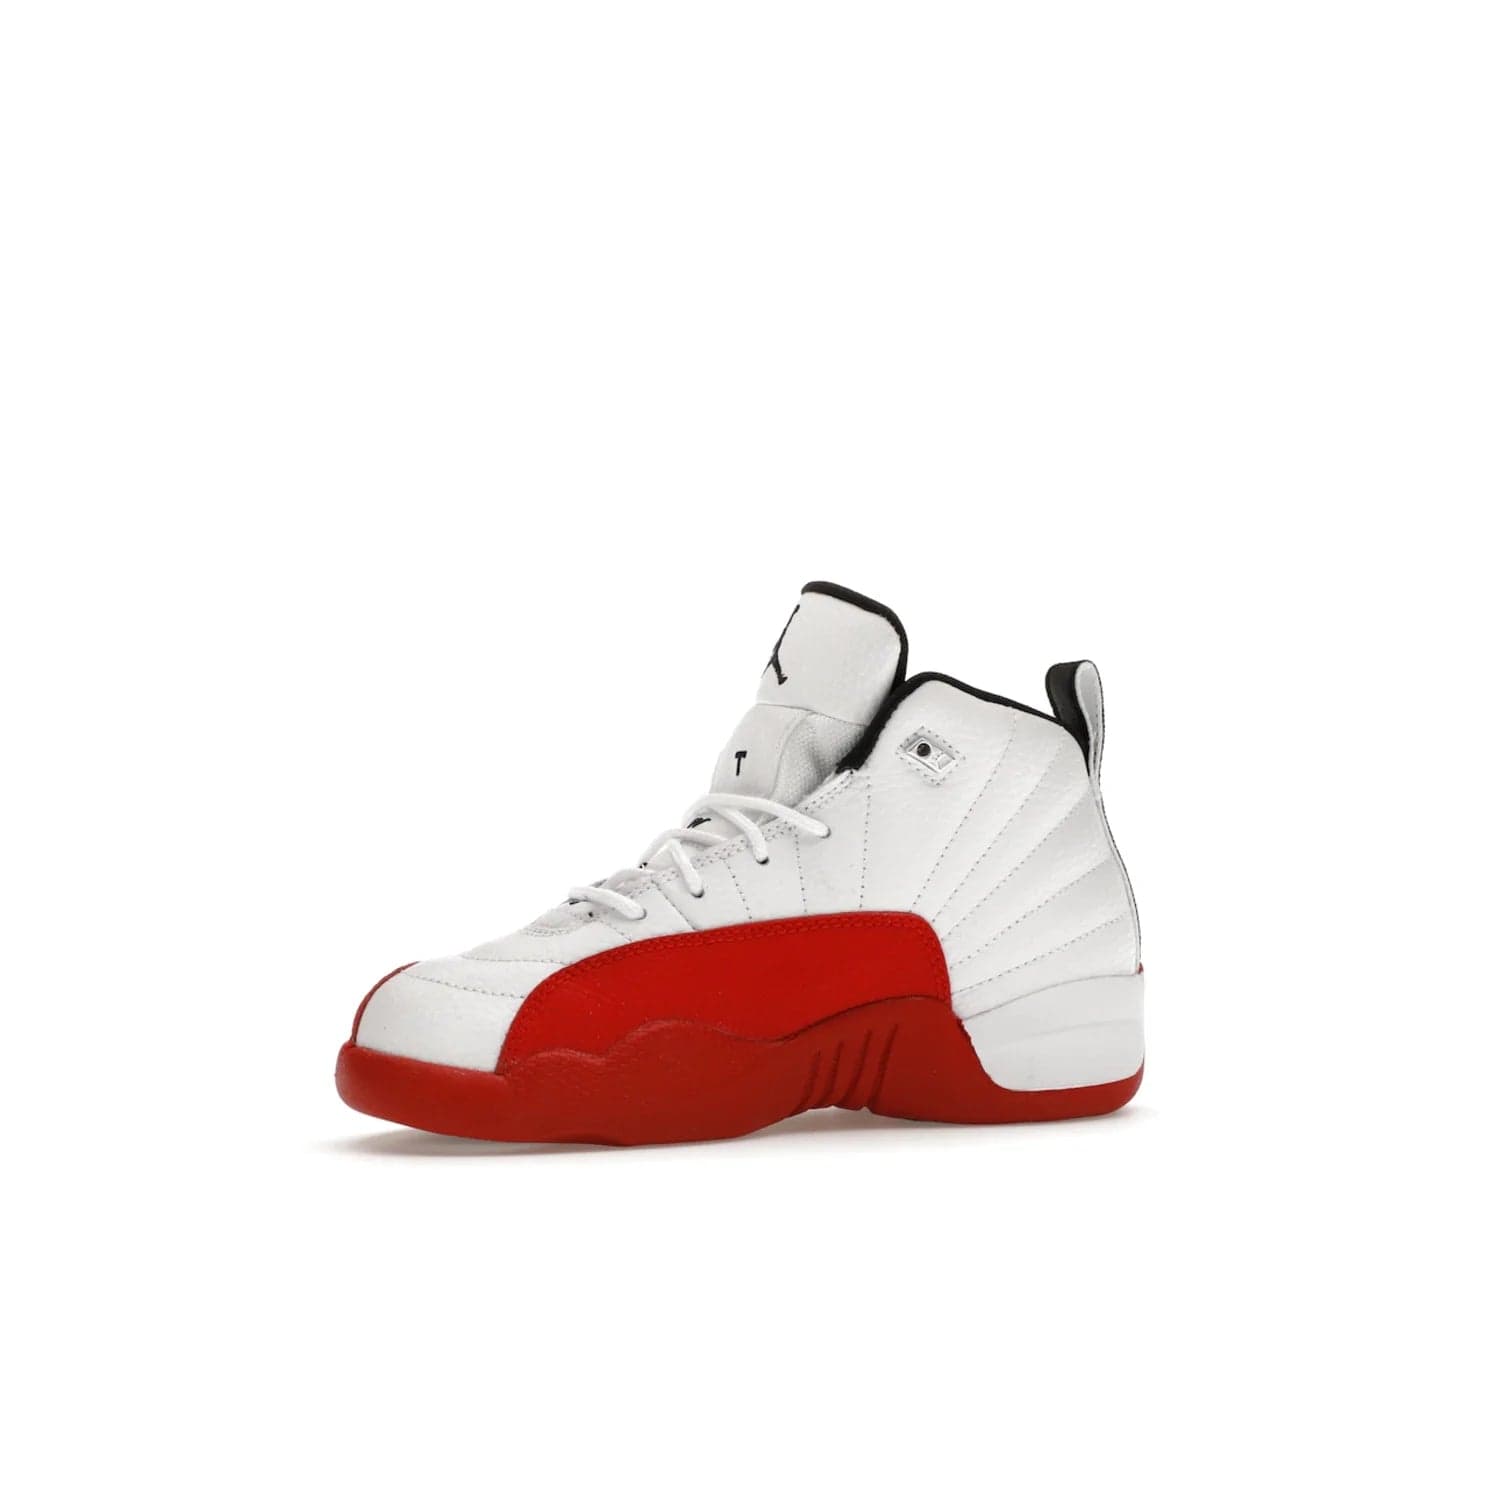 Jordan 12 Retro Cherry (2023) (PS) - Image 17 - Only at www.BallersClubKickz.com - Jordan 12 Retro Cherry dropping for toddlers in 2023! White leather upper with black overlays and red branding. Classic court style for your little one.